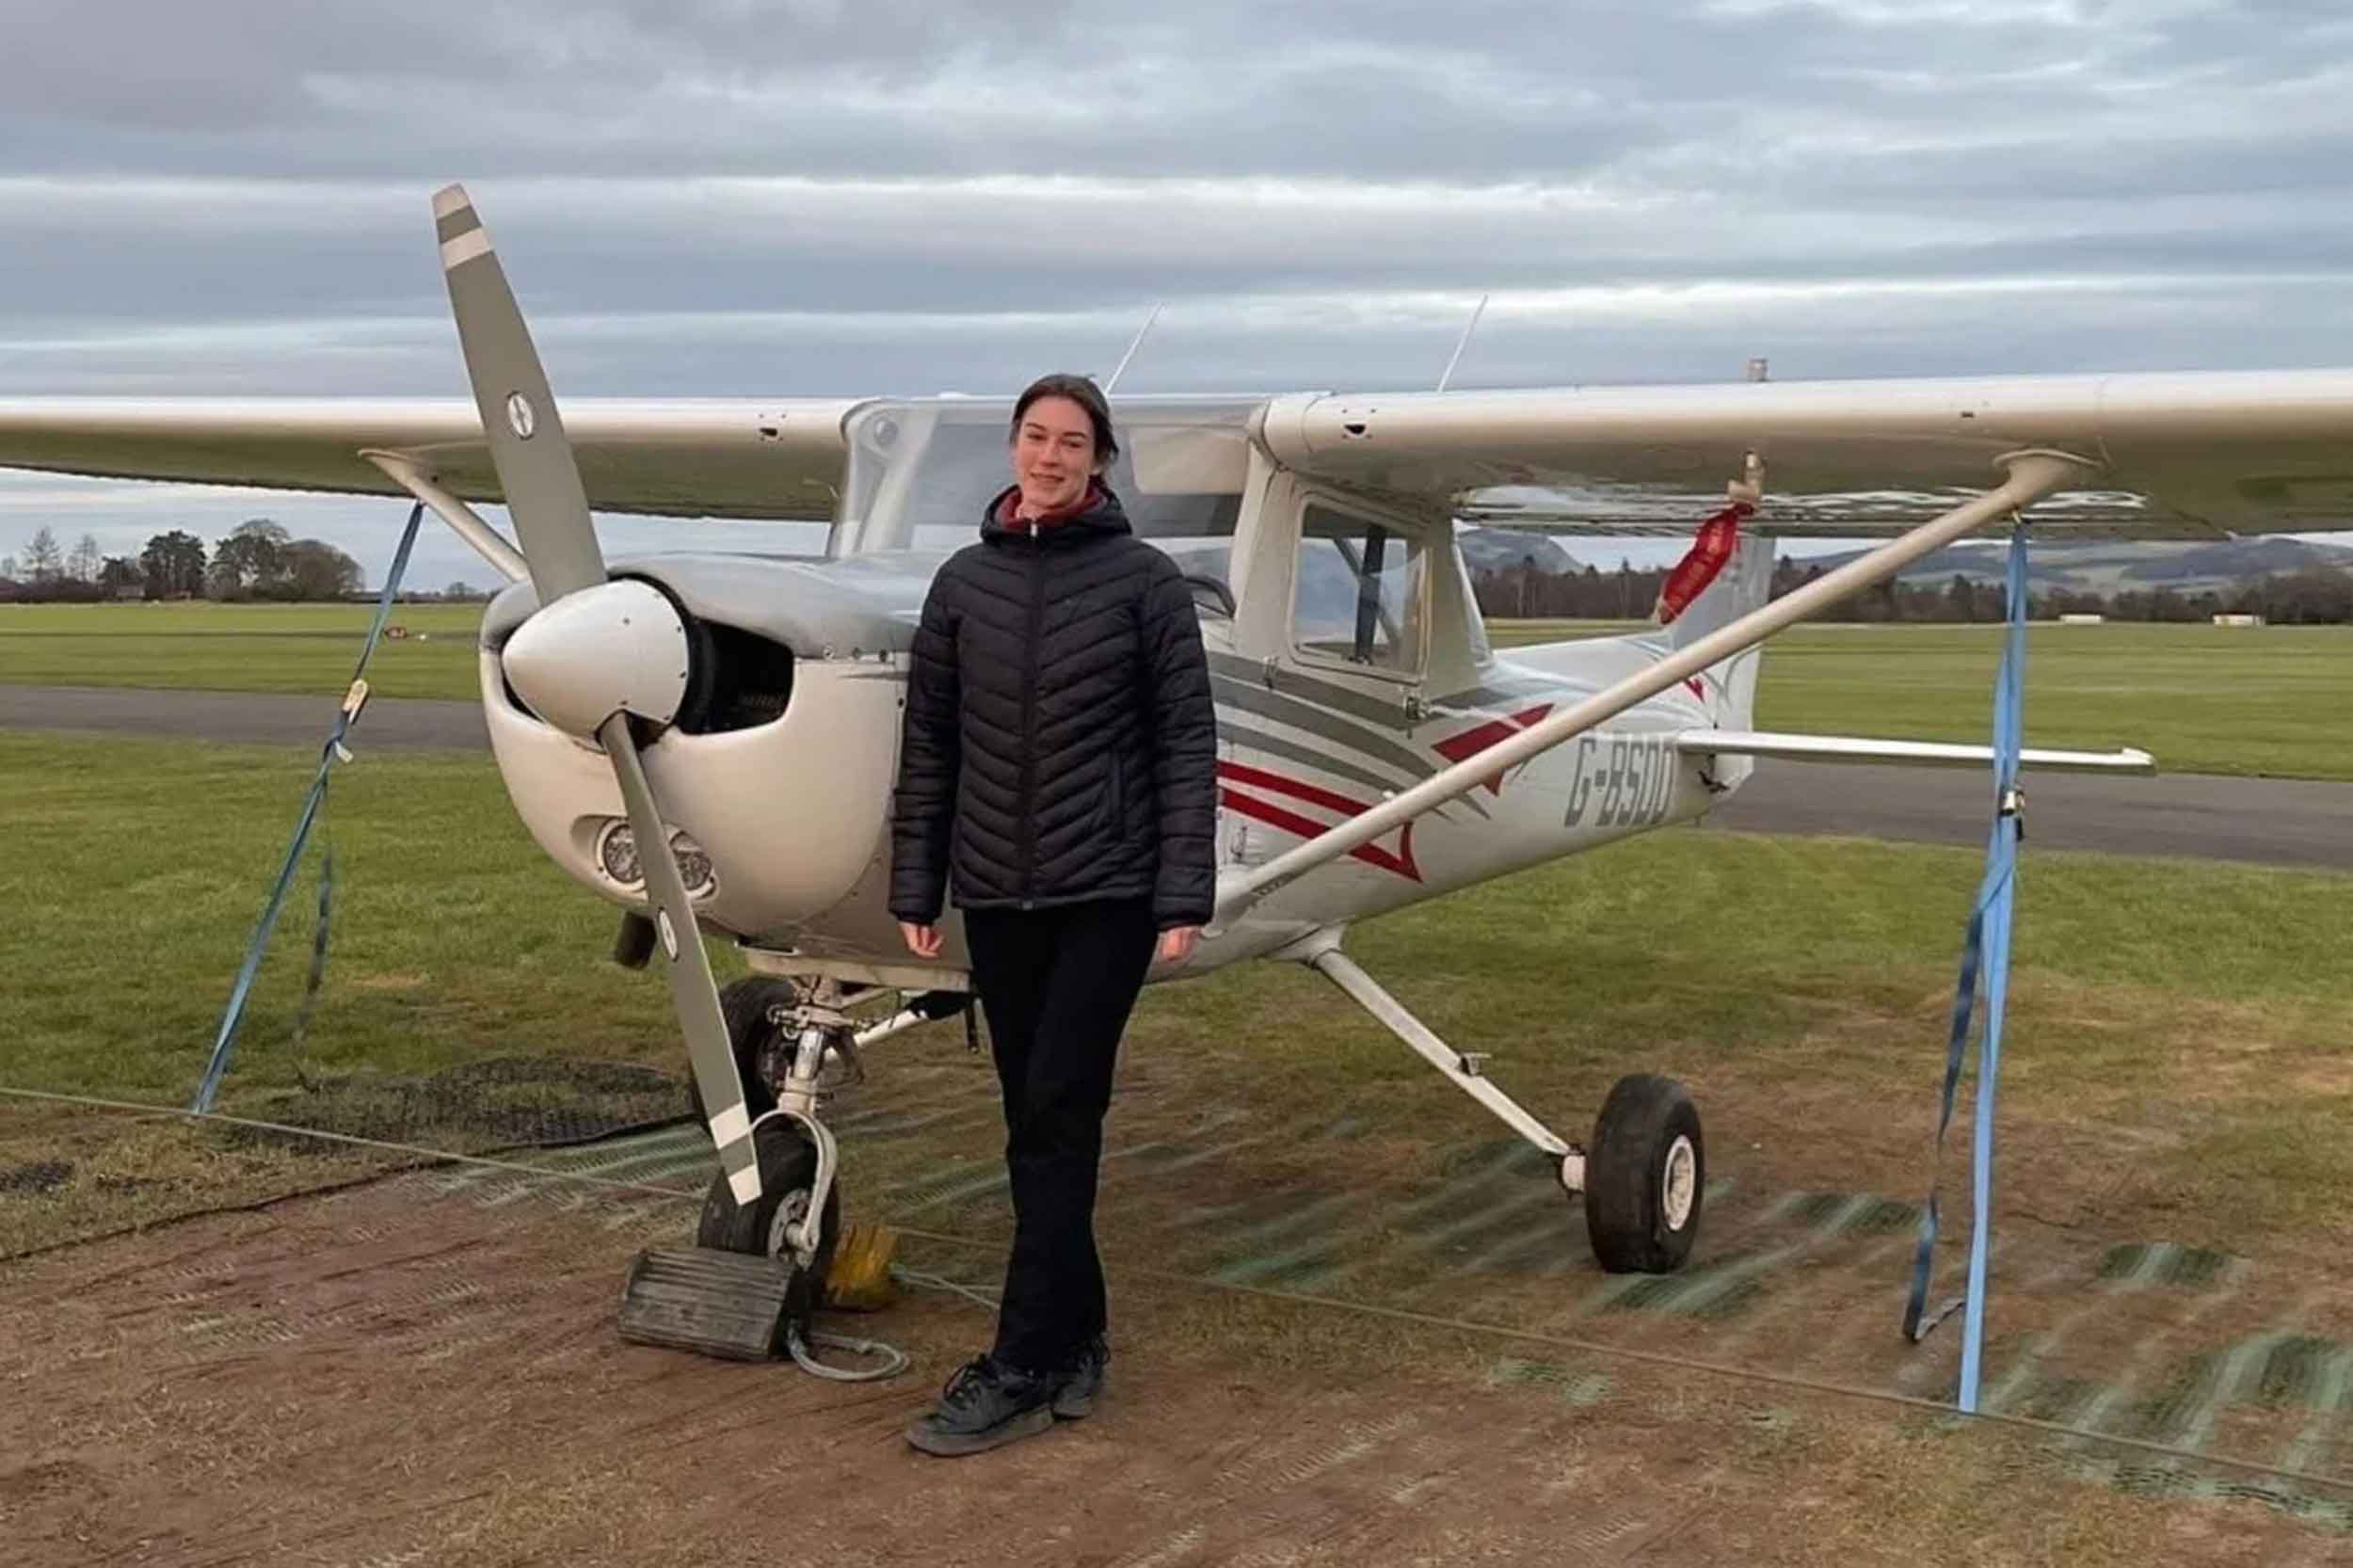 Kate Lenny is aiming to fly seaplanes as a commercial pilot